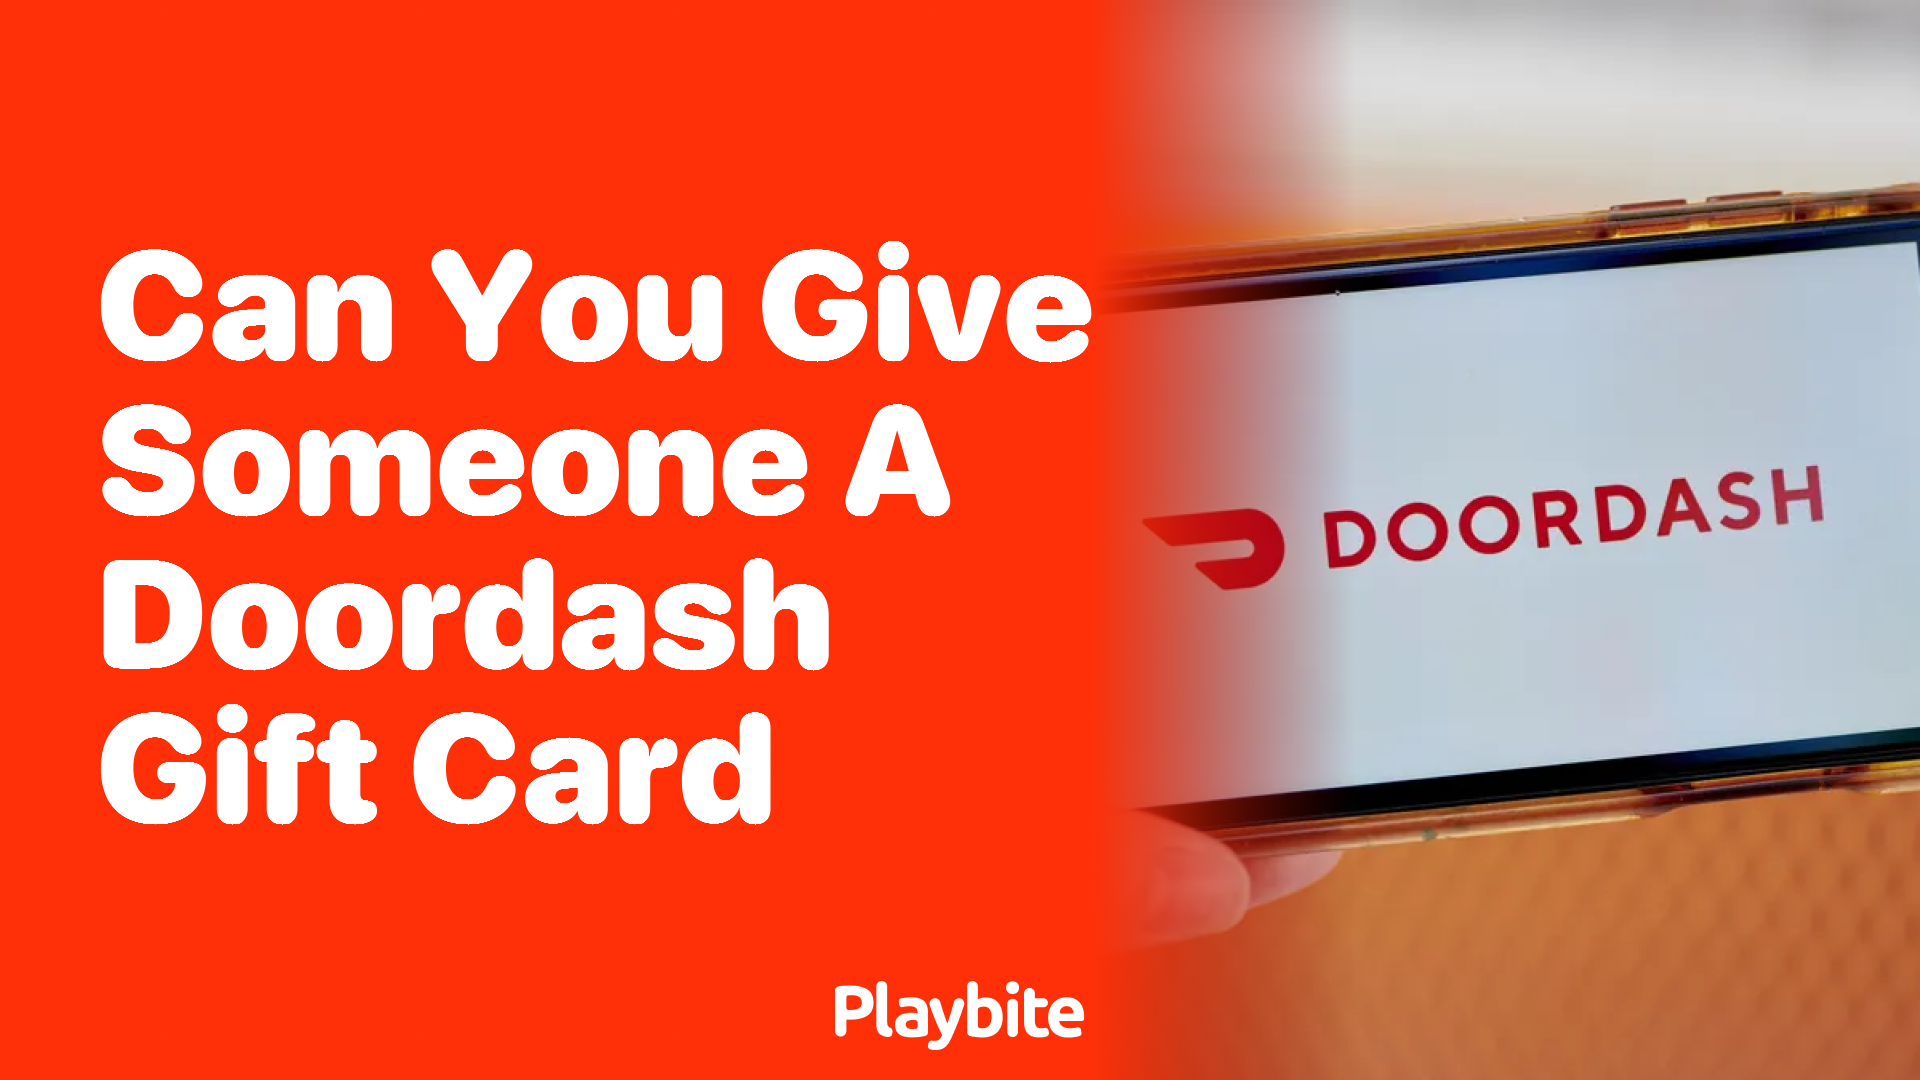 Can You Give Someone a DoorDash Gift Card?